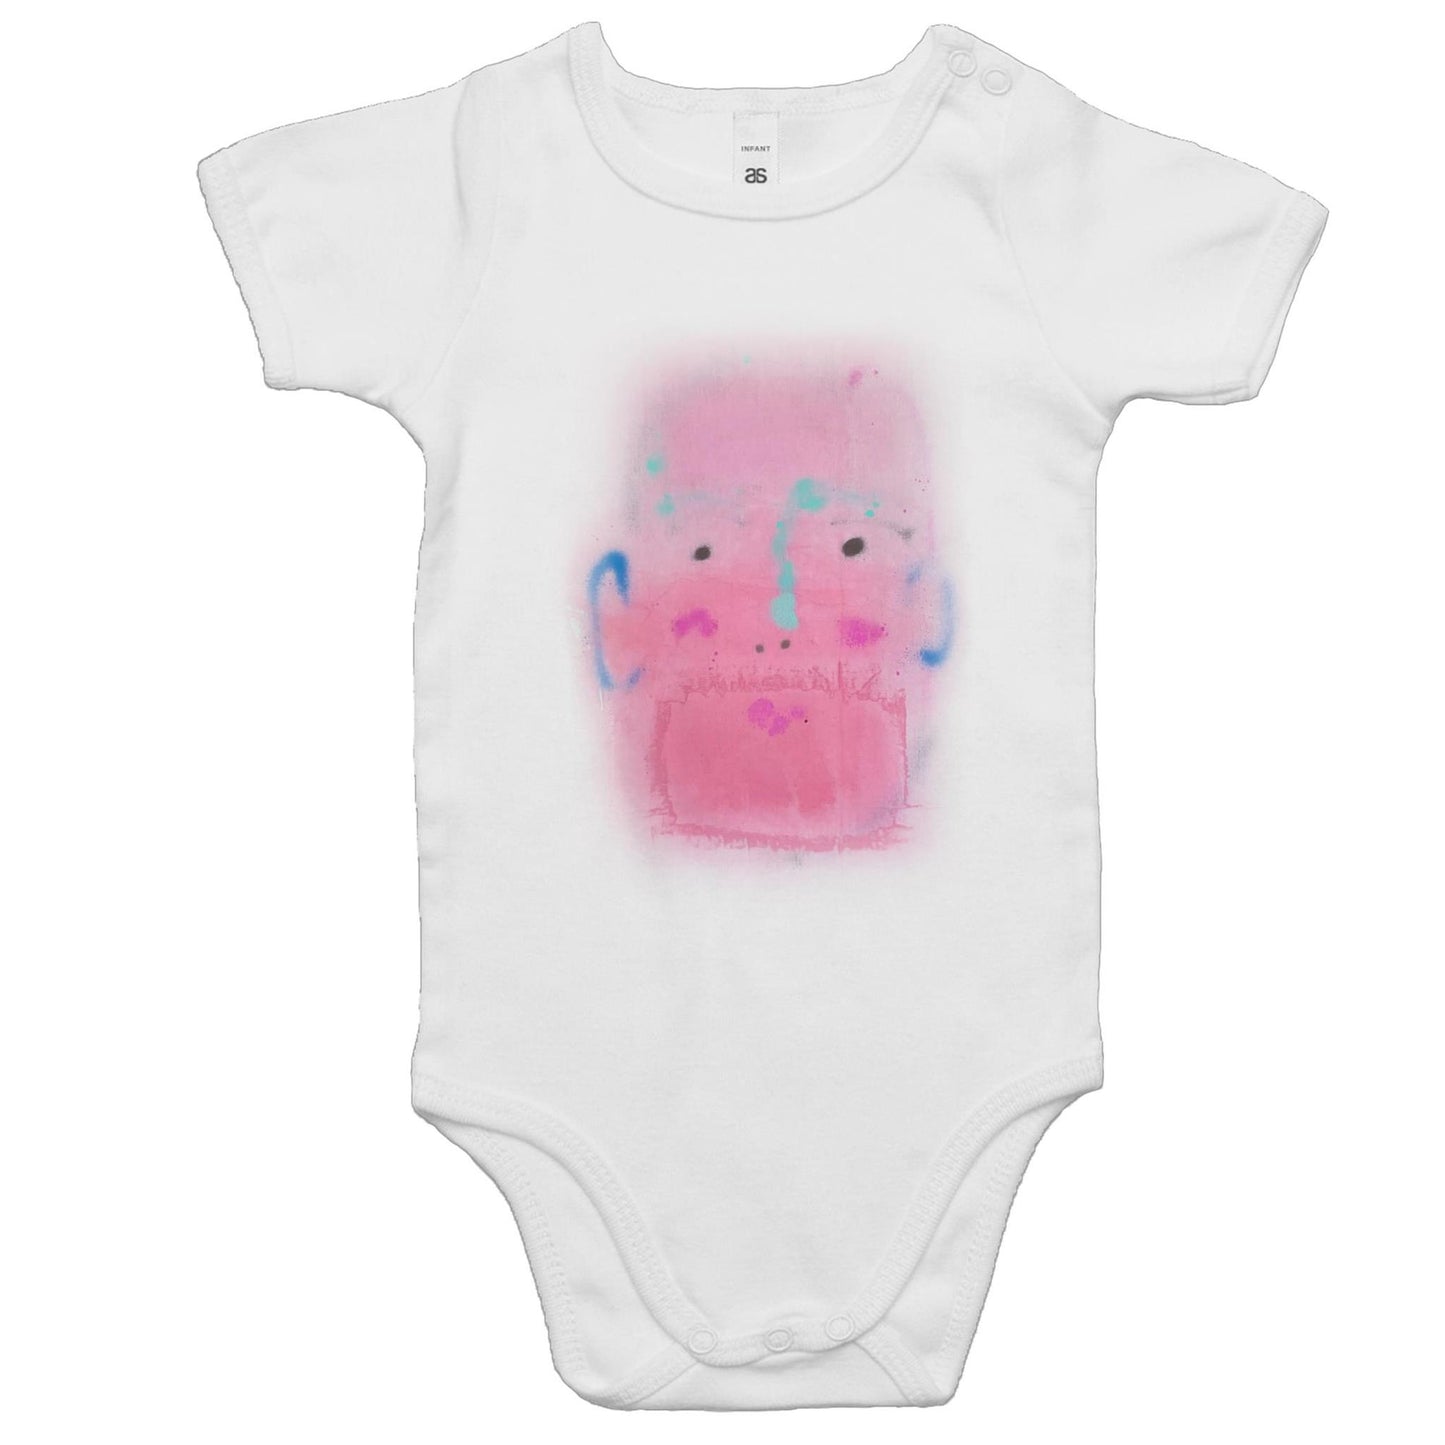 Red Face Rompers for Babies